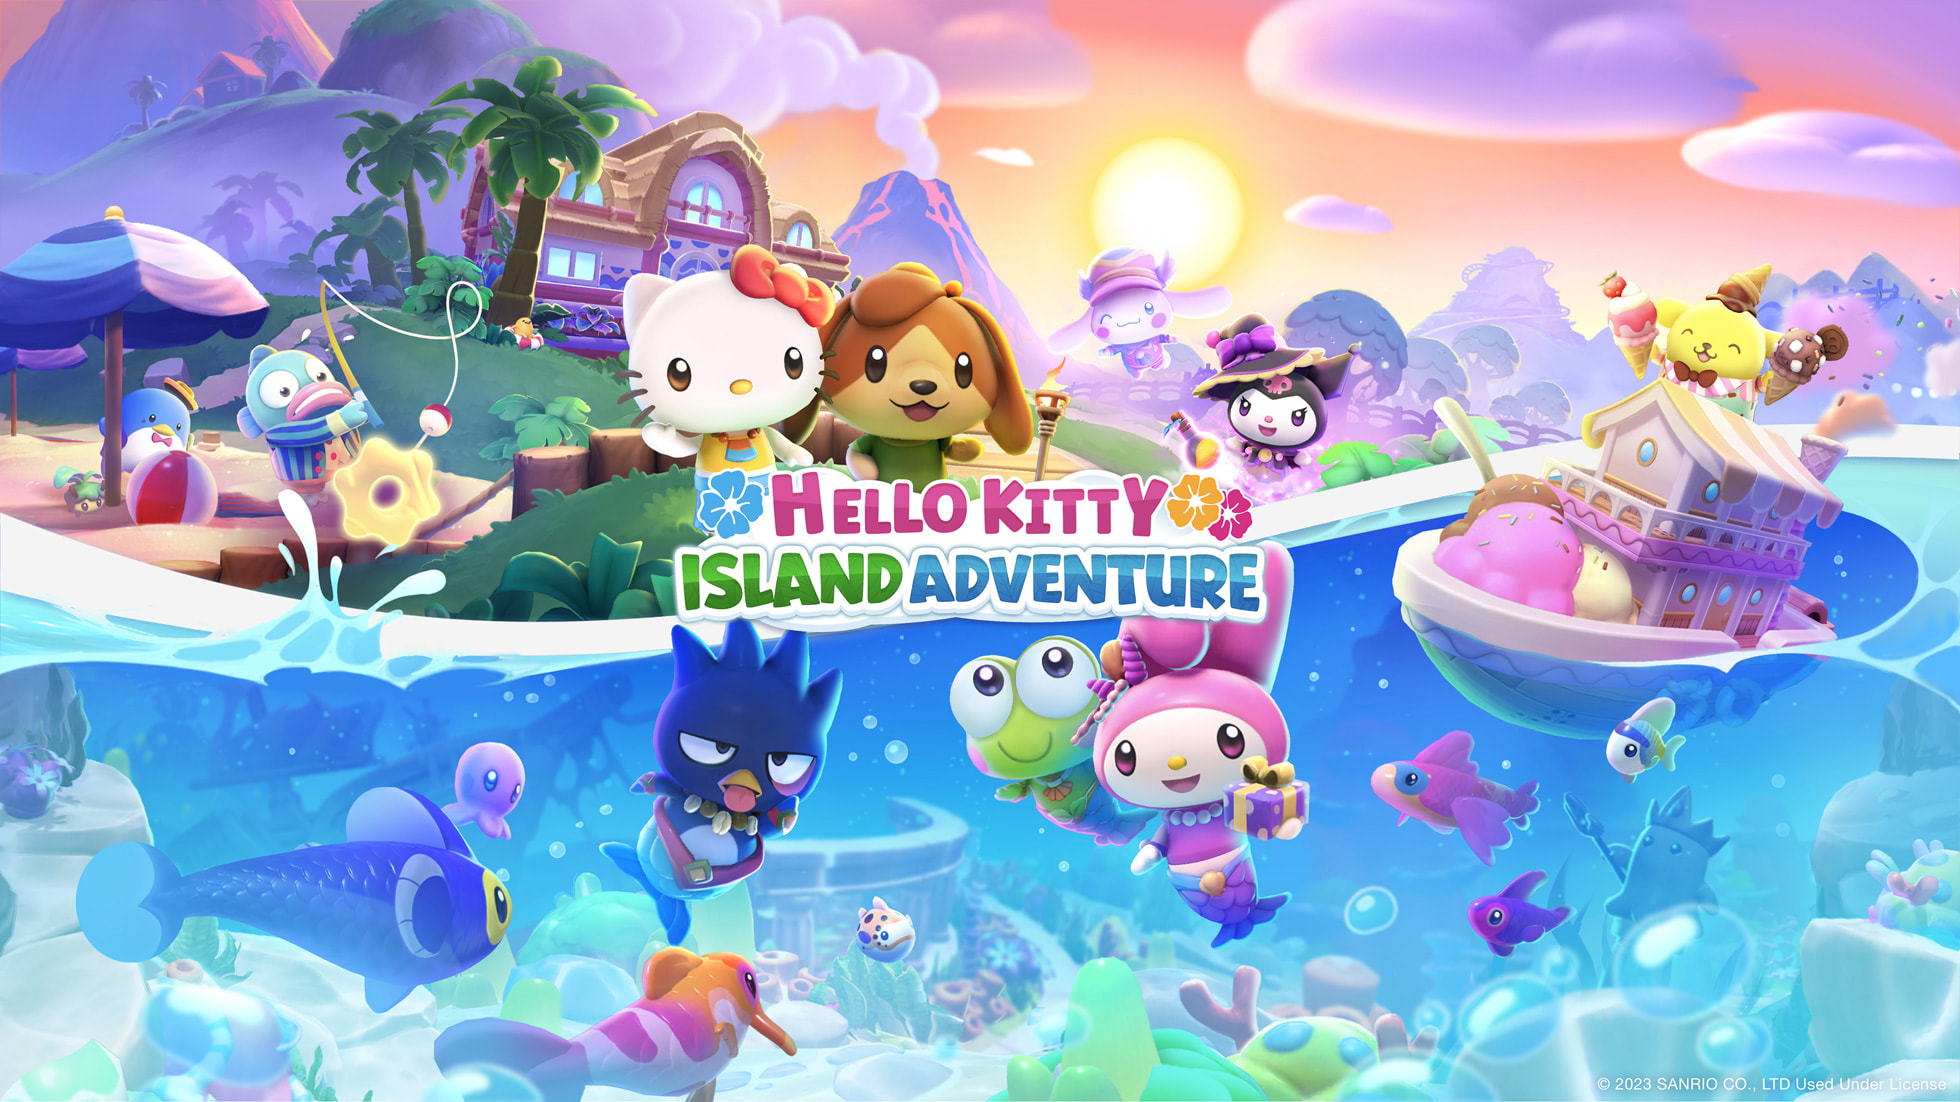 Hello Kitty Friends - Apps on Google Play